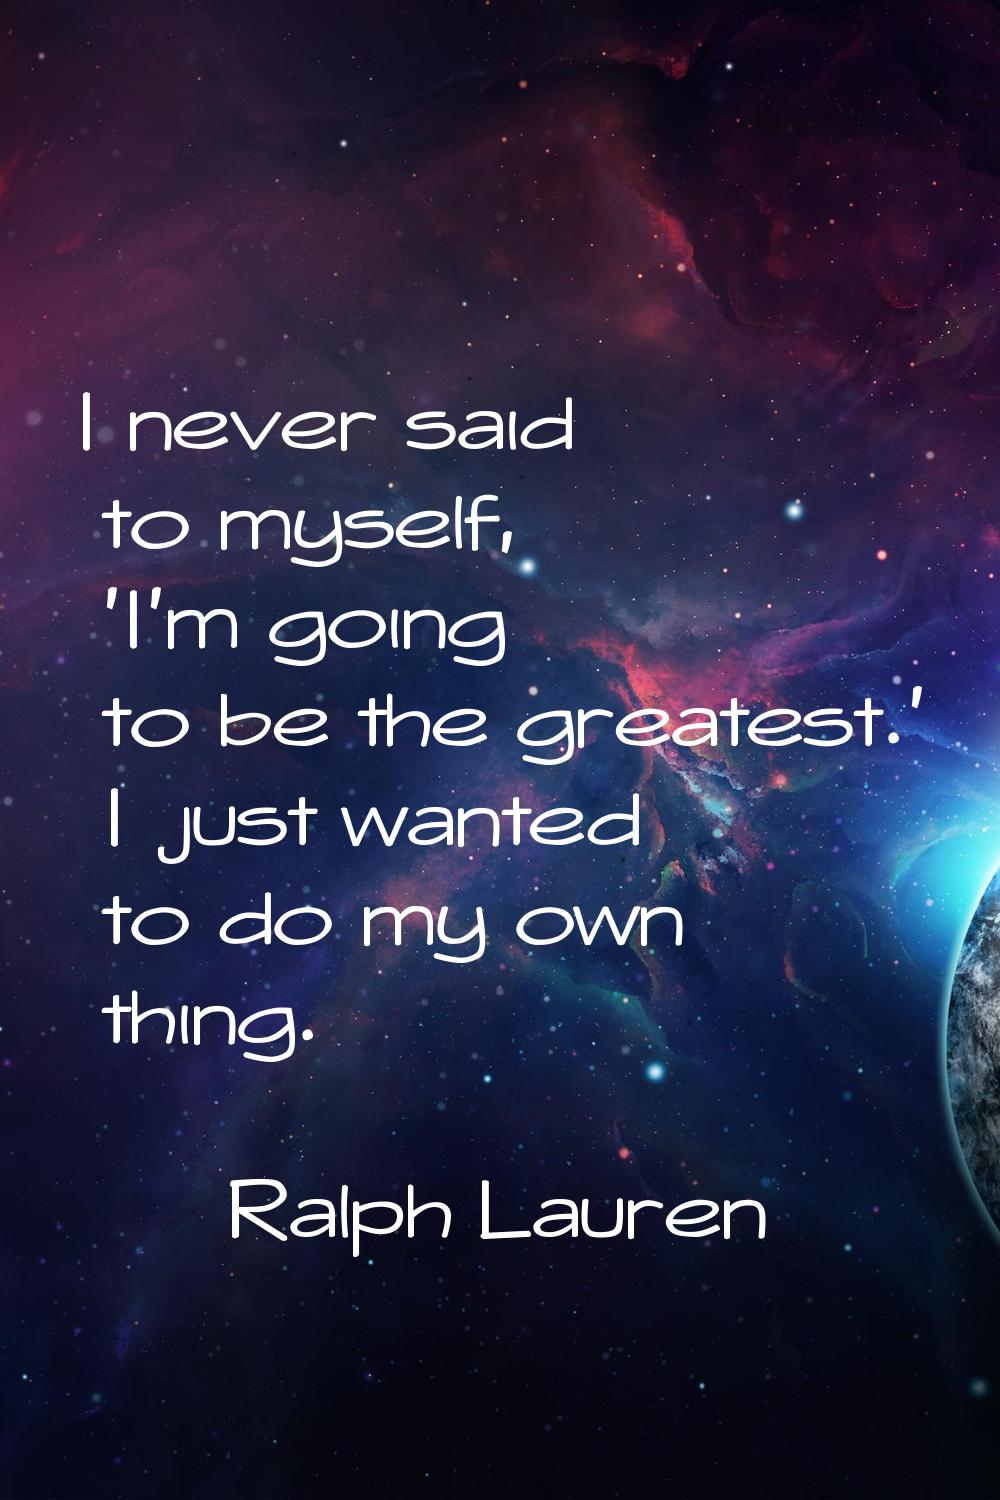 I never said to myself, 'I'm going to be the greatest.' I just wanted to do my own thing.